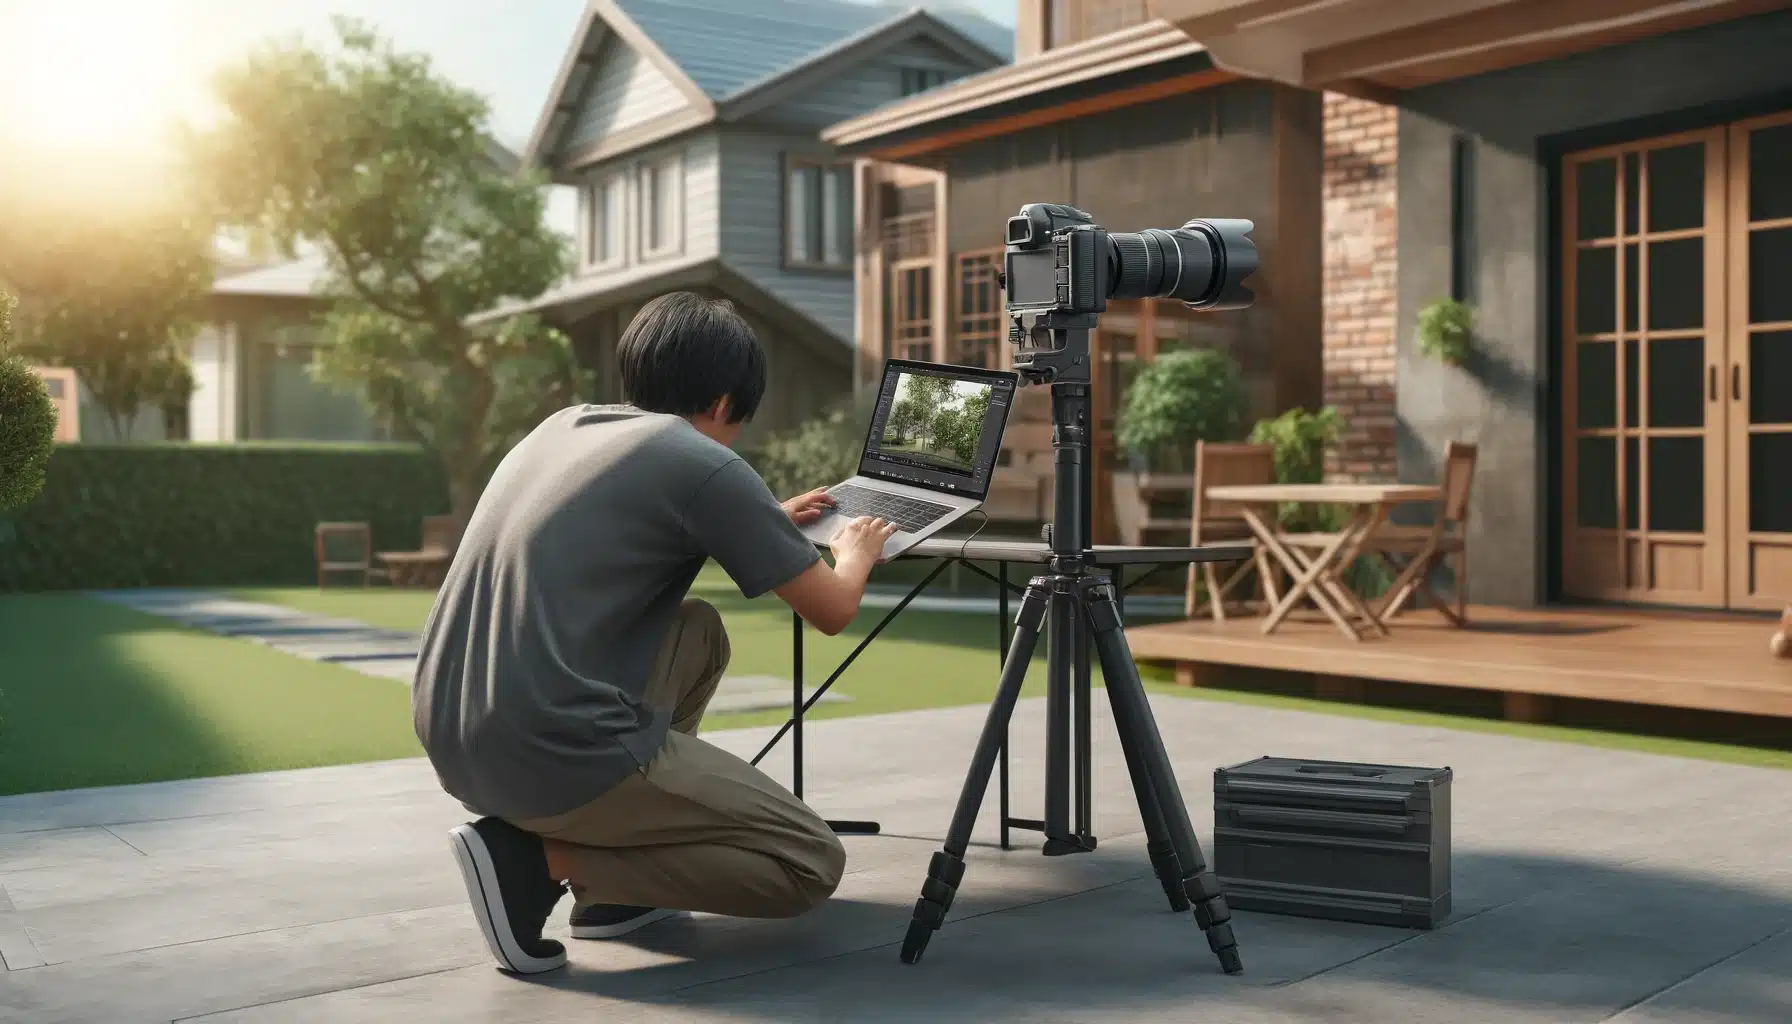 Photographer setting up a Camcorder Fetter system outside a home, with a laptop showing live images on a portable table in a garden setting.